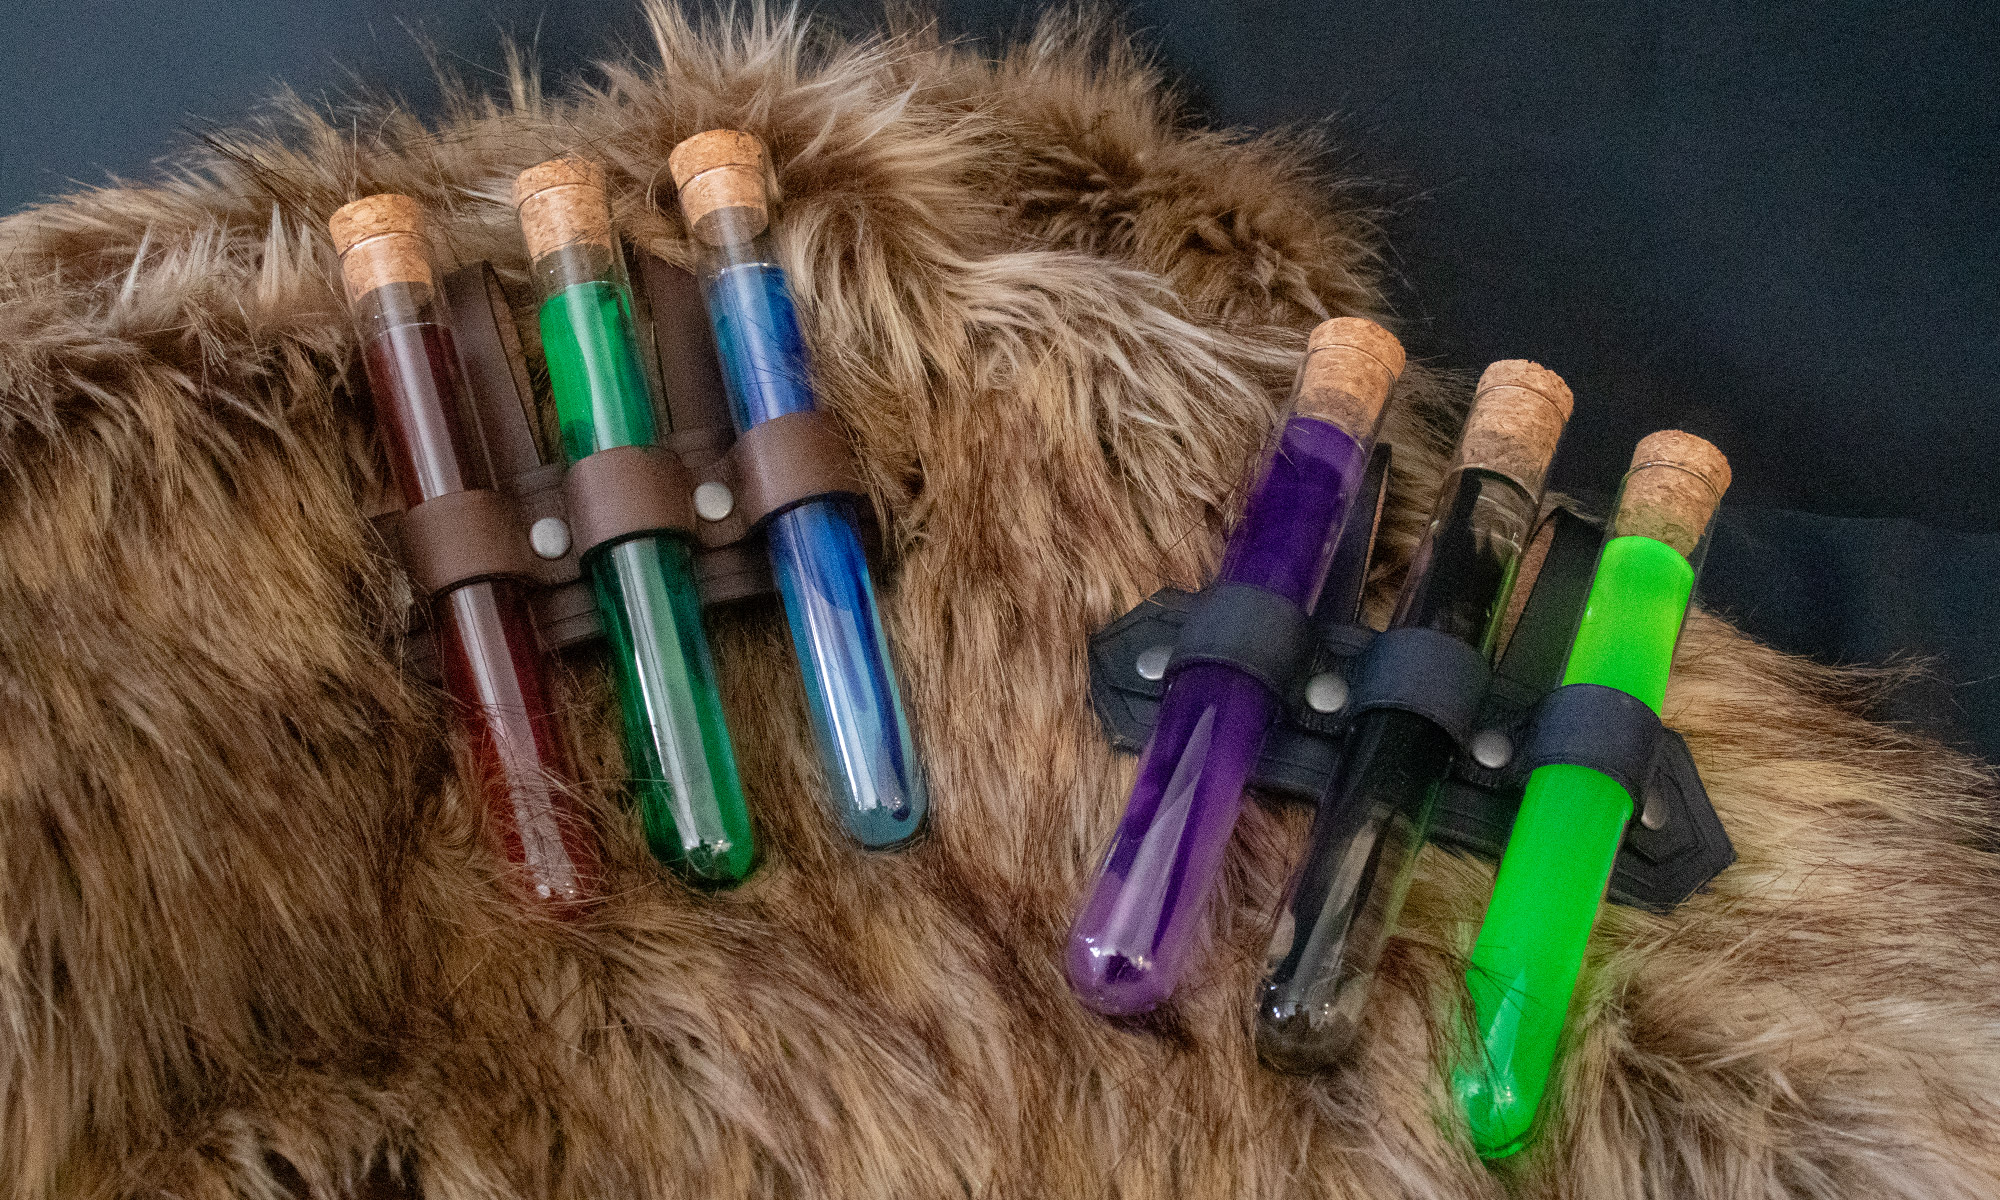 Two leather belt holsters with "triple" potions. Left: Dark brown leather with red, green, and blue potions. Right: Black leather holster with purple, clear with black swirl, and neon geen potions.